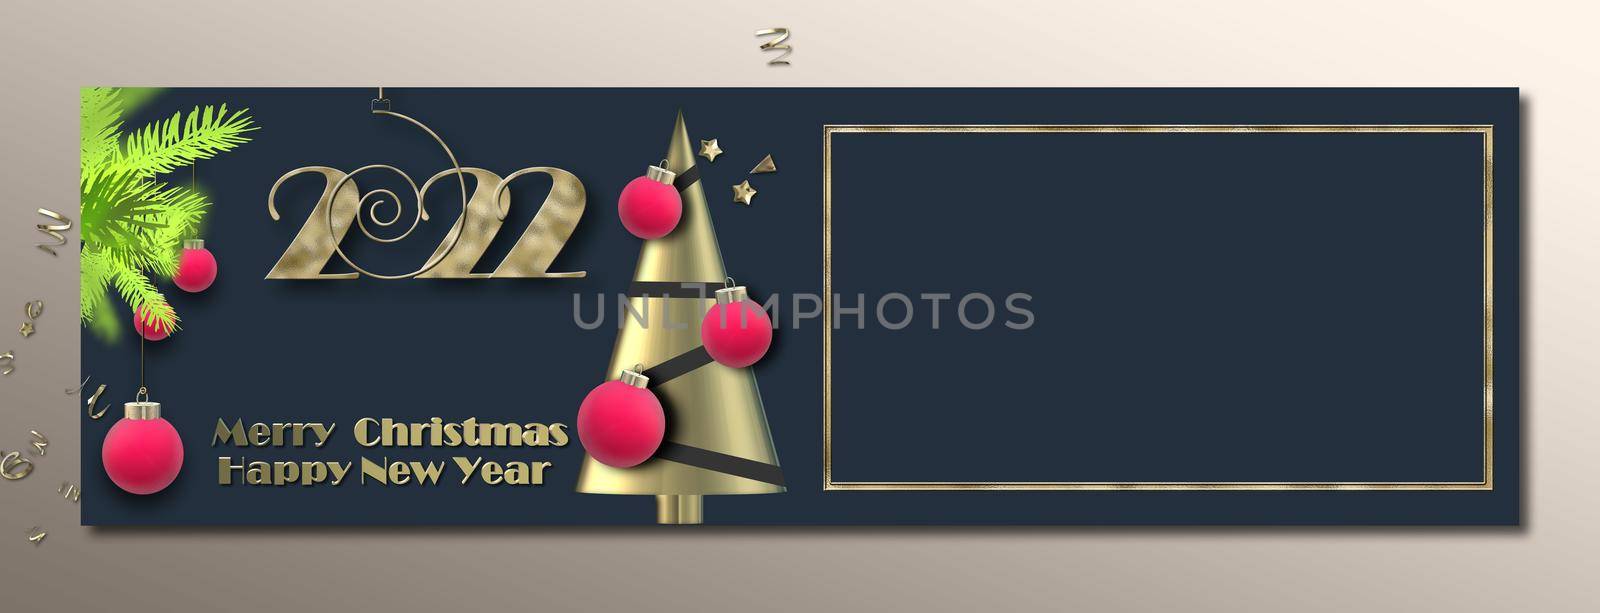 Christmas banner, Festive holiday header design. Christmas greeting card, web poster, holiday New Year menu, corporate Xmas card, covers. Xmas templates party banner. Place for text 3D render